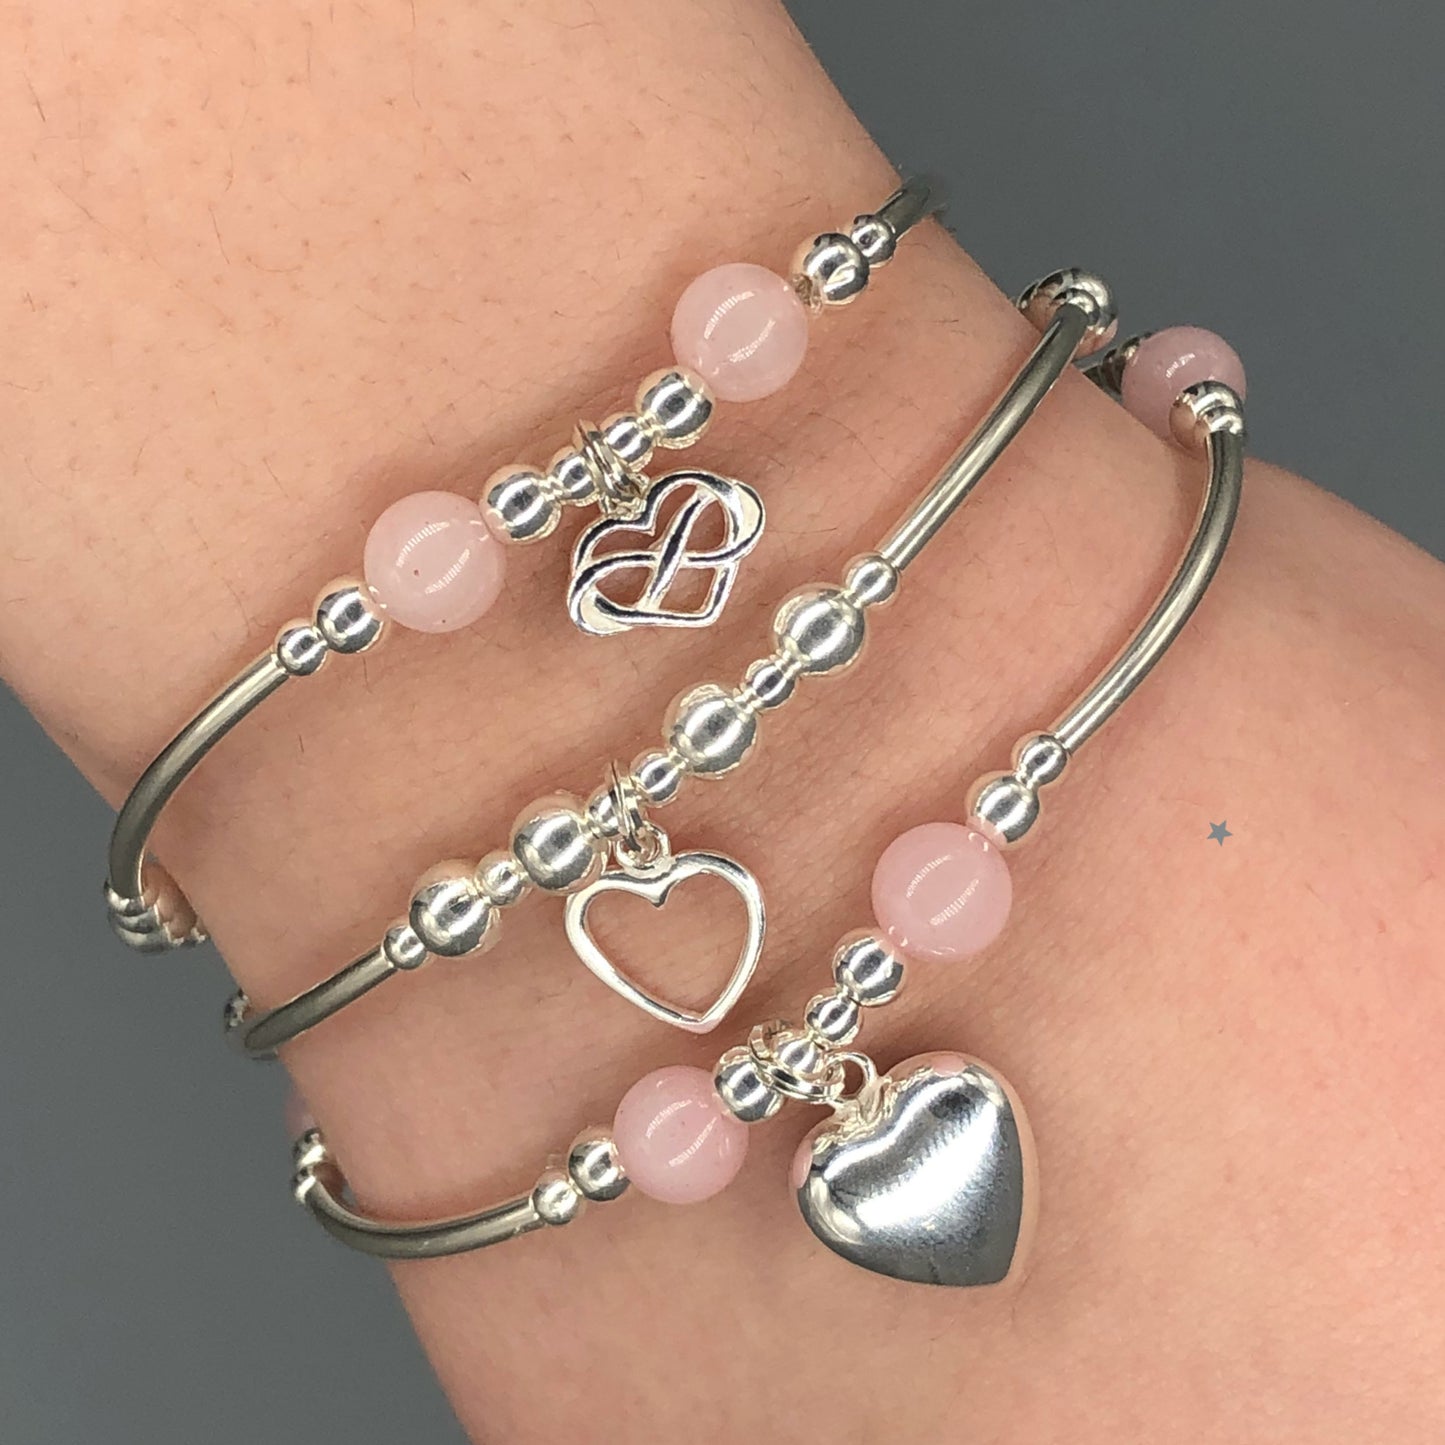 Rose Quartz Hearts Sterling Silver Girl's Charm Stacking Bracelet Set by My Silver Wish